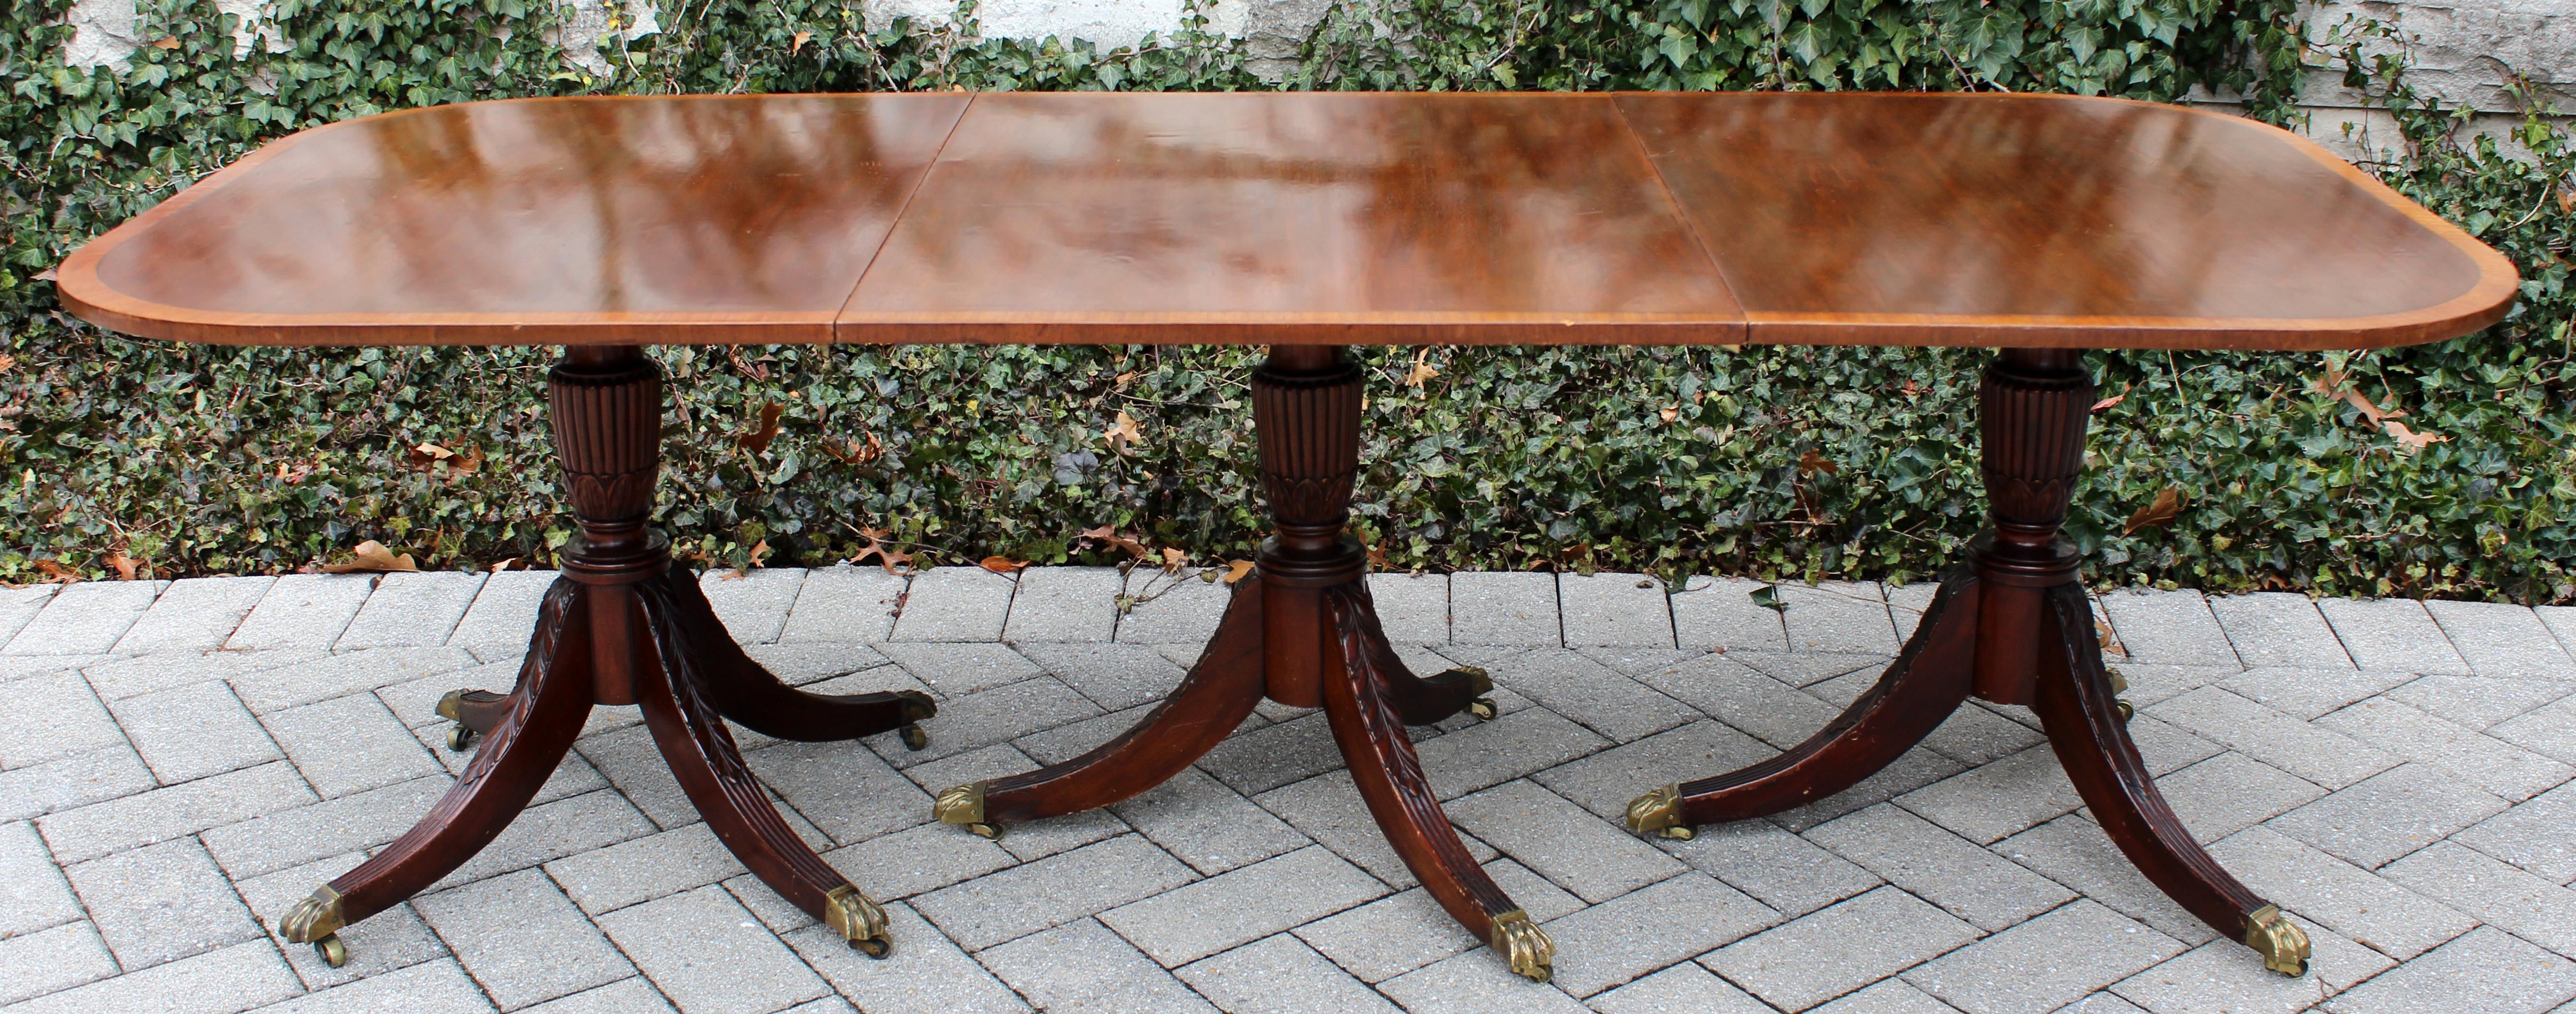 For your consideration is a magnificent, traditional antique Duncan Fife style, expandable mahogany dining table brass claw foot in very good vintage condition. The dimensions are 93